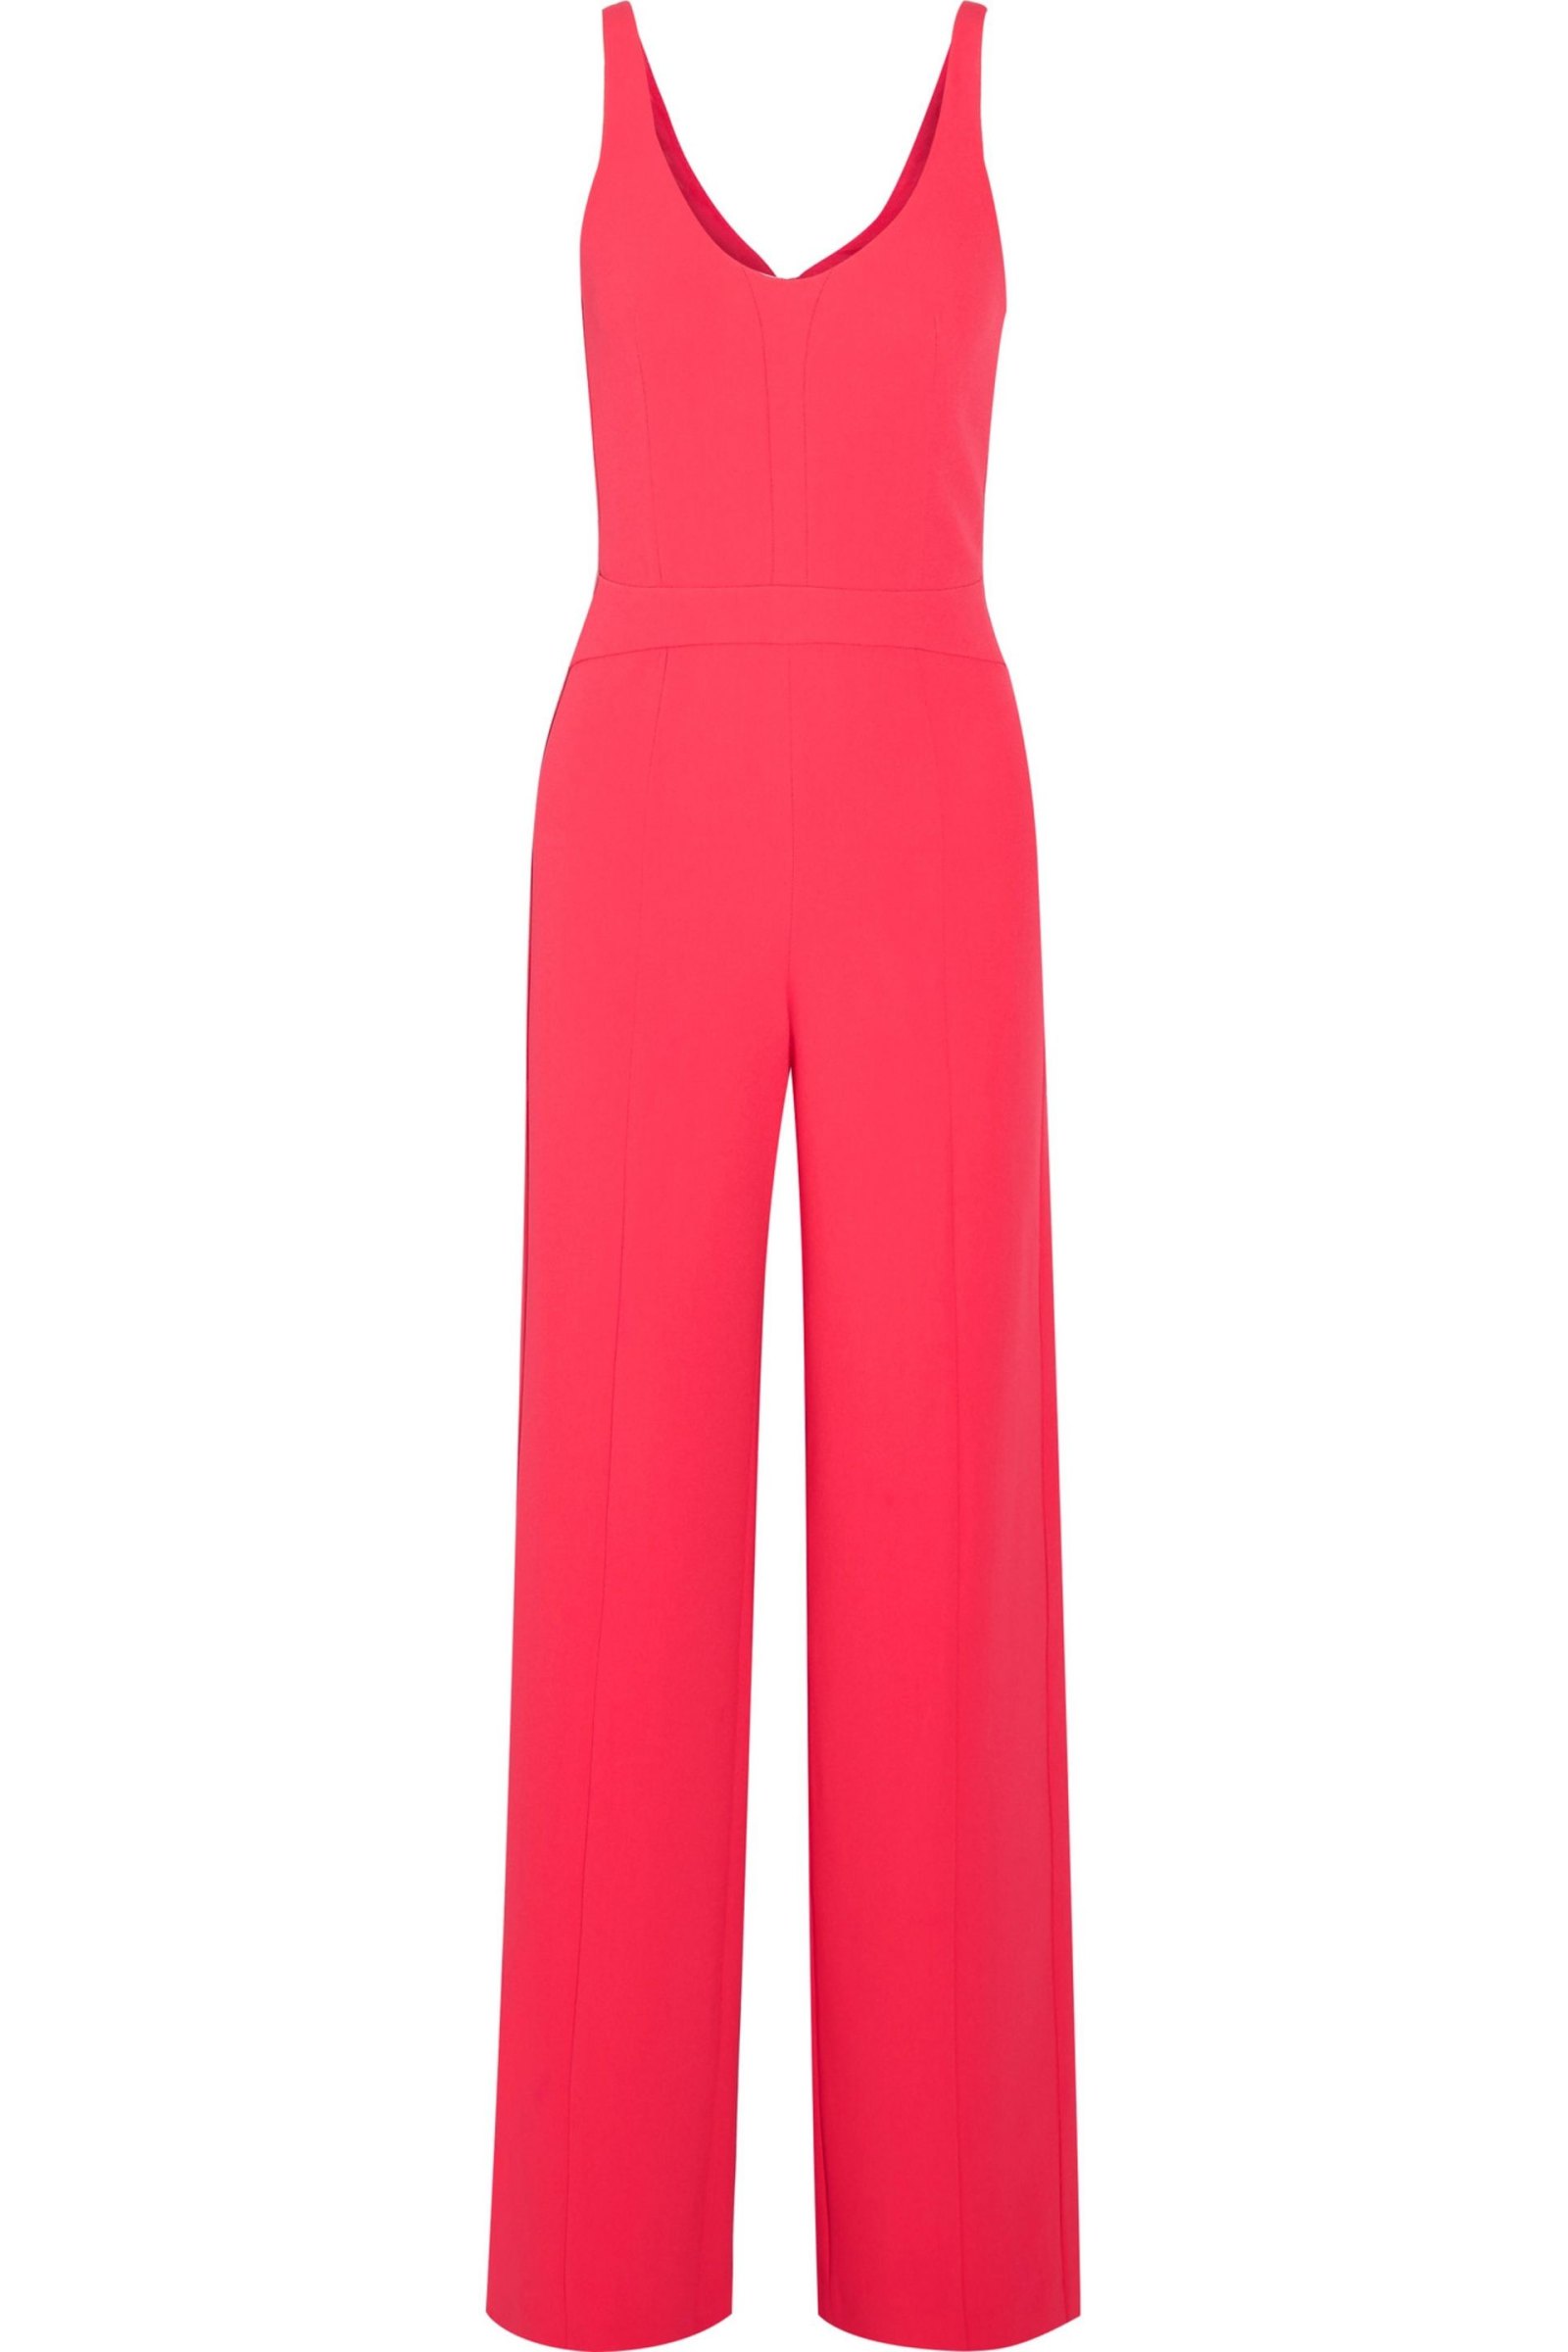 'Bachelorette' Becca Kufrin's Red Jumpsuit and Similar Styles